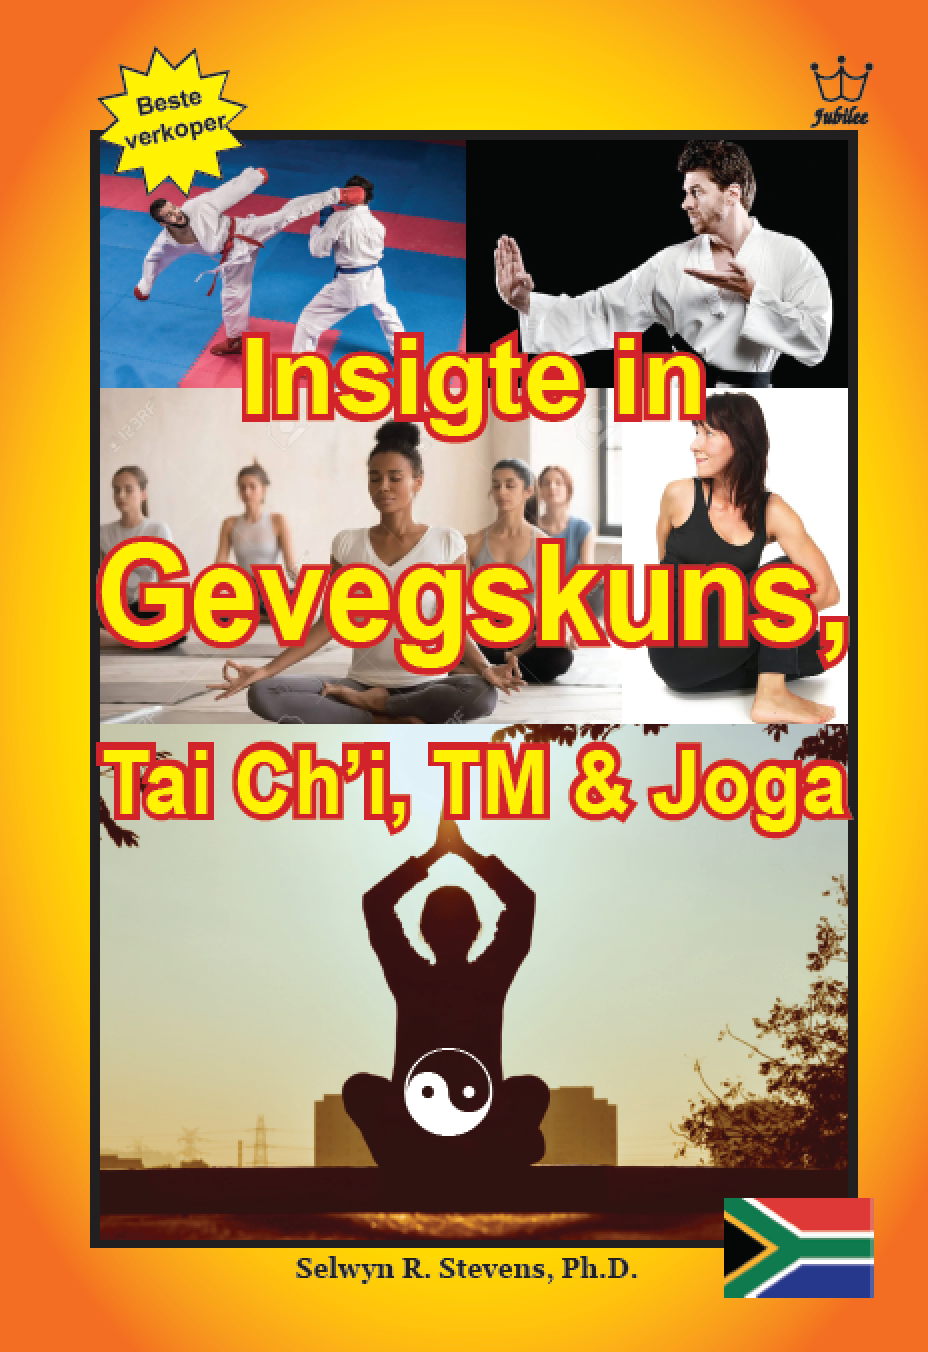 Insigte in Gevegskuns Tai Ch’i, T.M. & Joga - eBook in Afrikaans Language